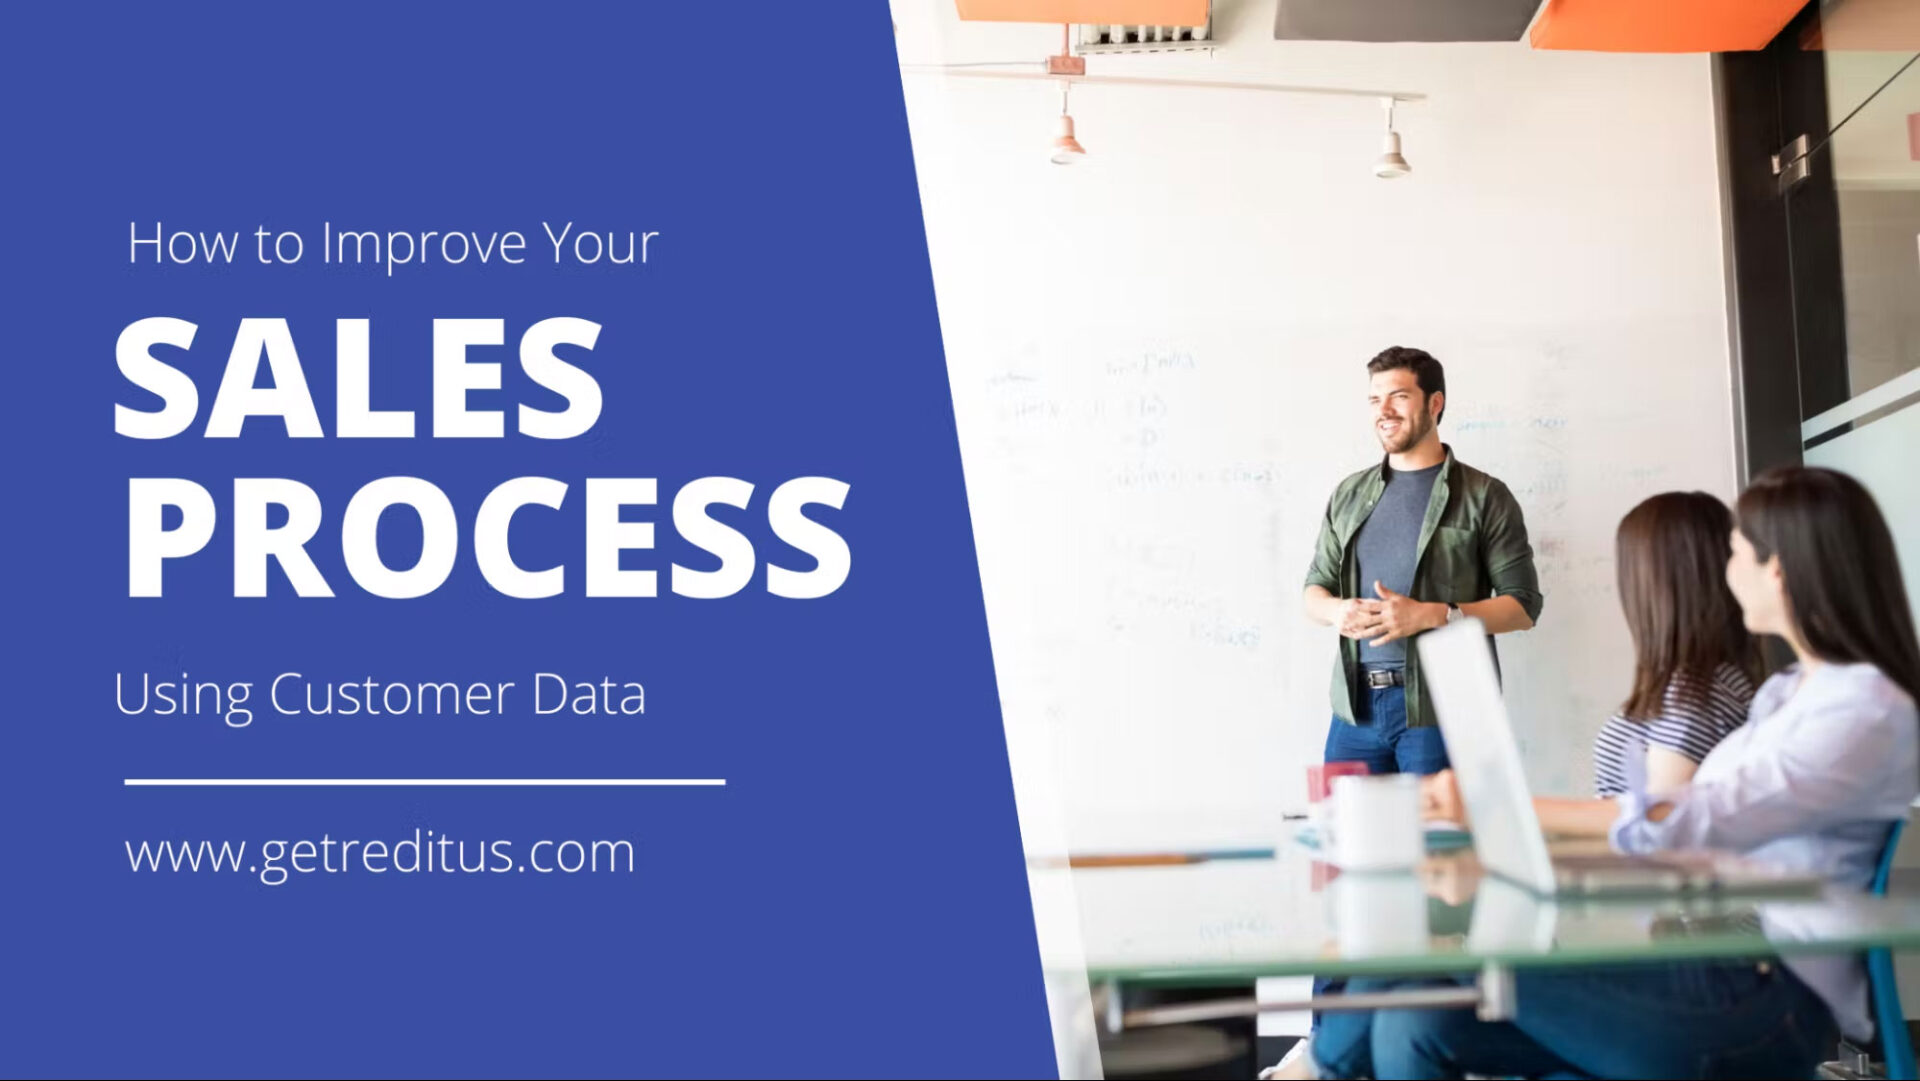 How To Use Customer Data To Improve Your Sales Process